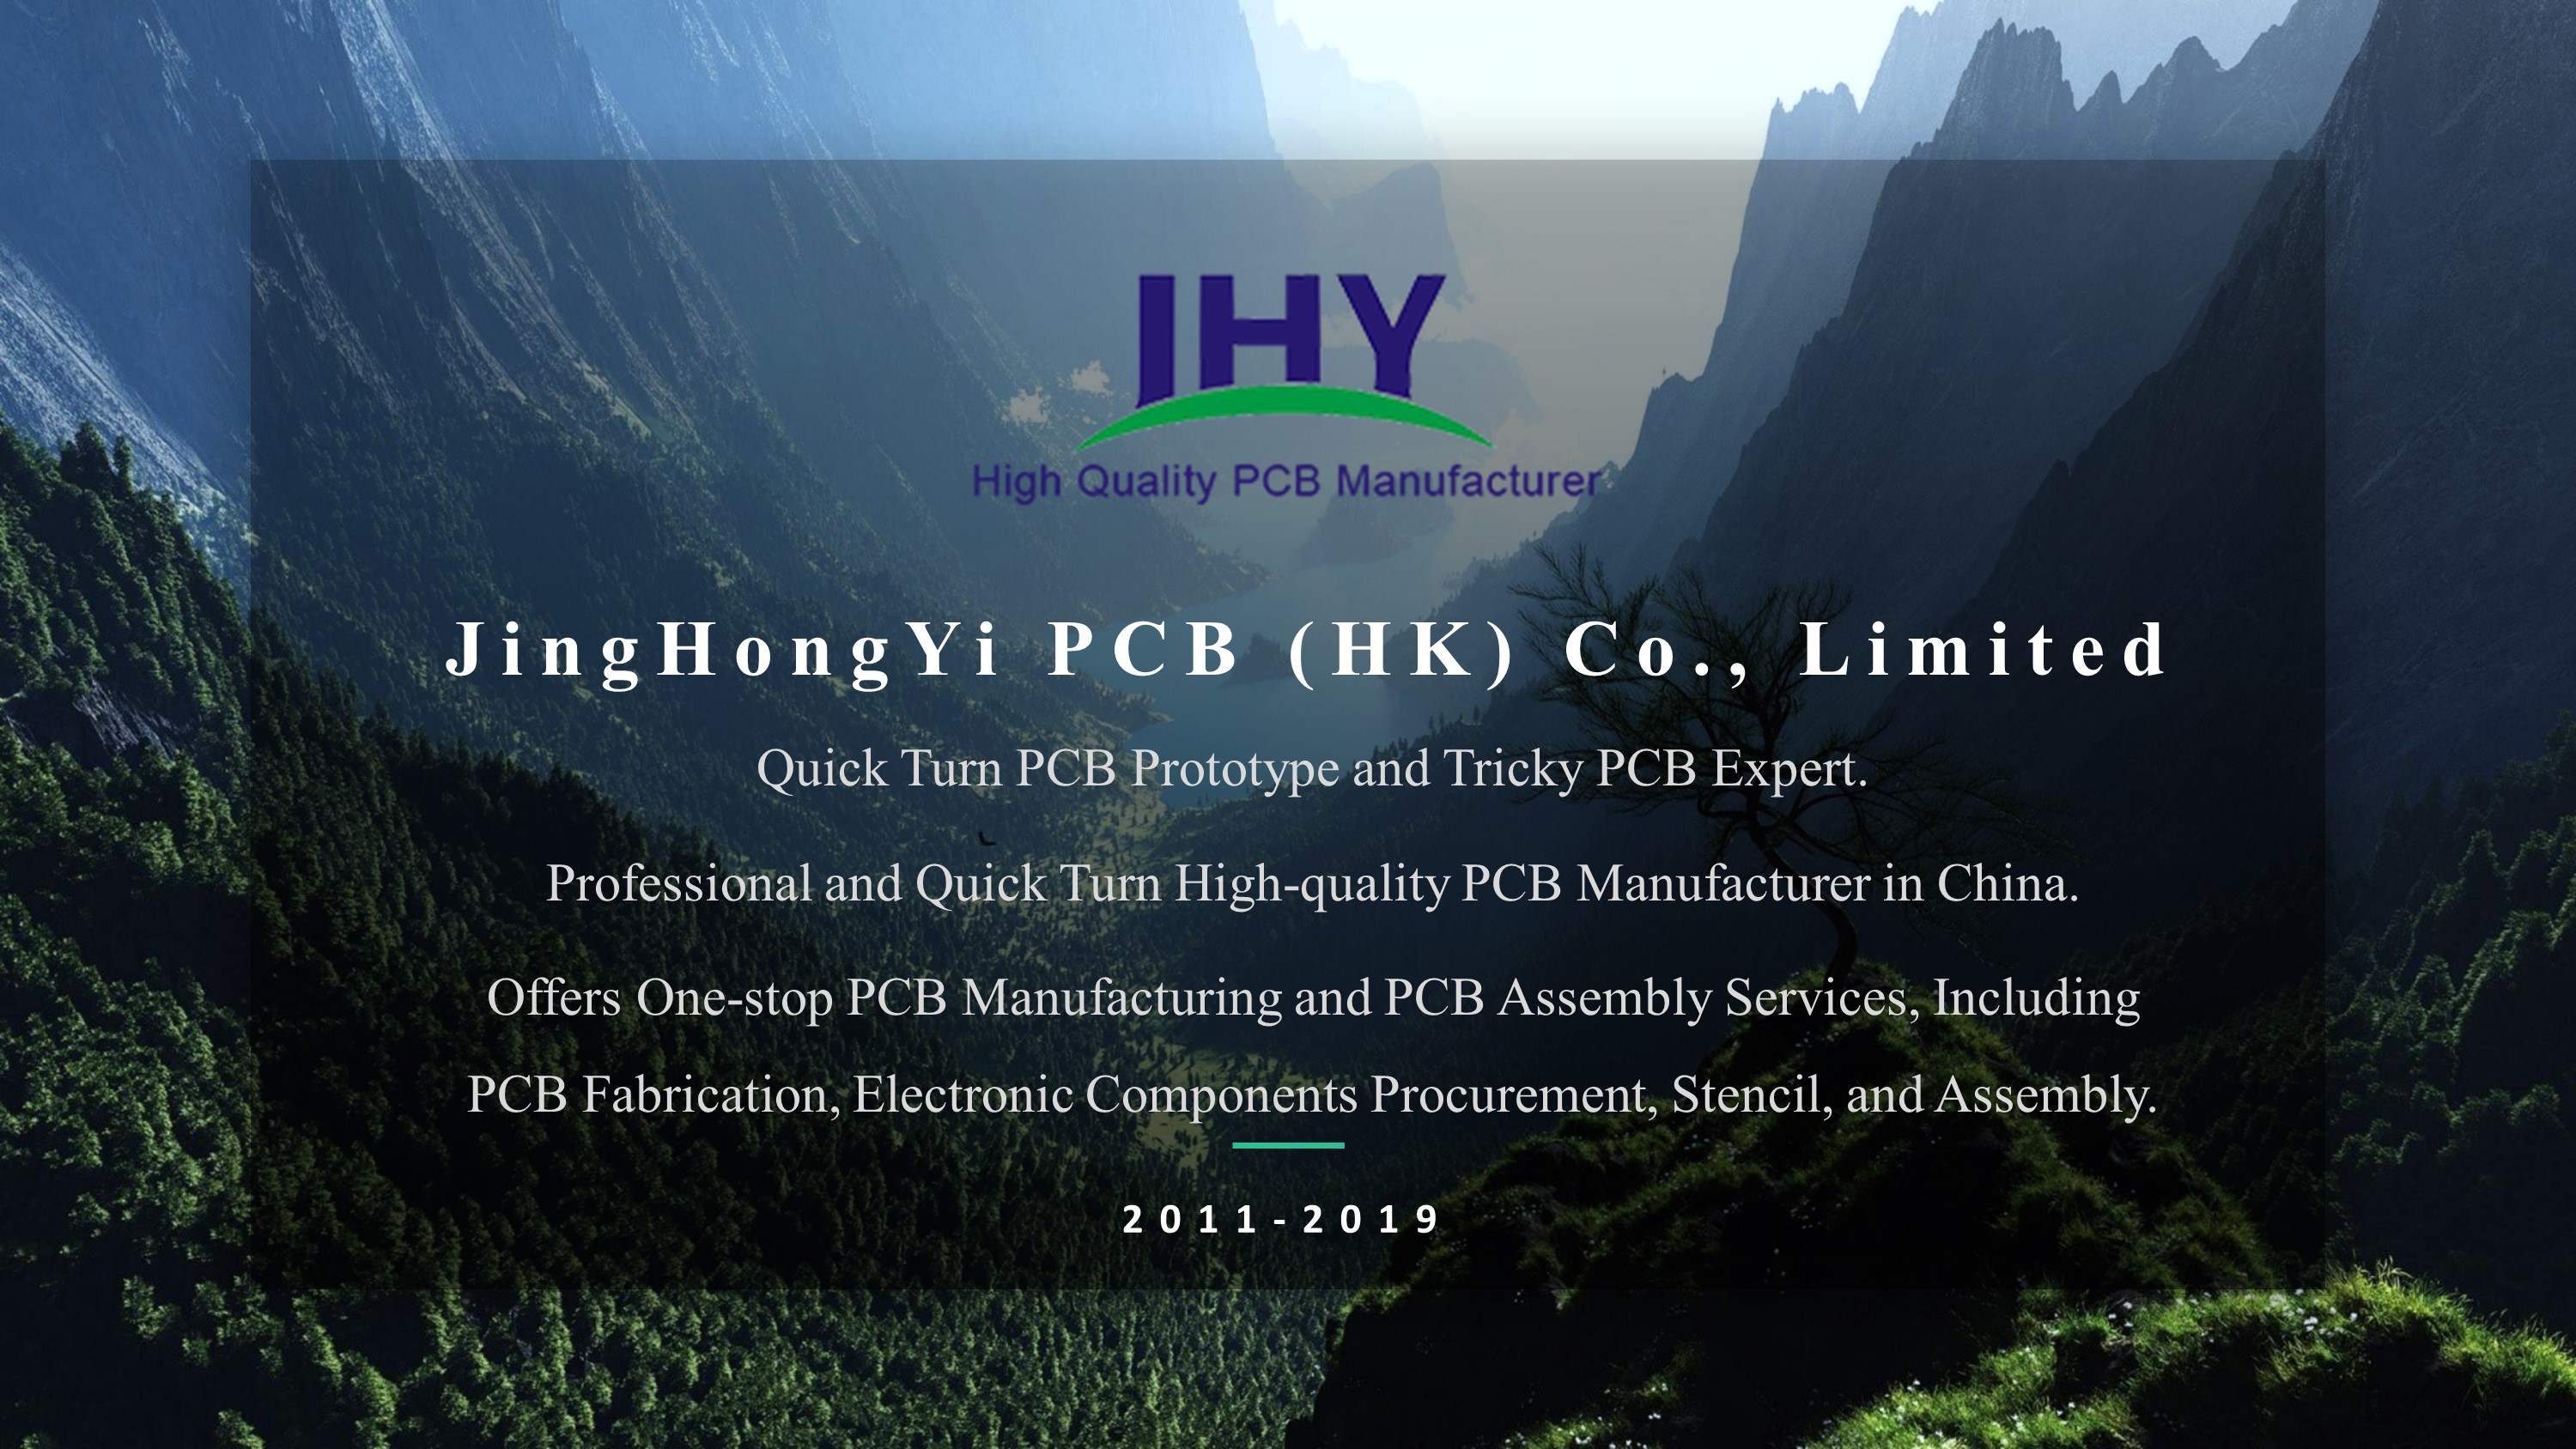 As The Best PCB + PCBA Manufacturer, We Are Your Best Choice.